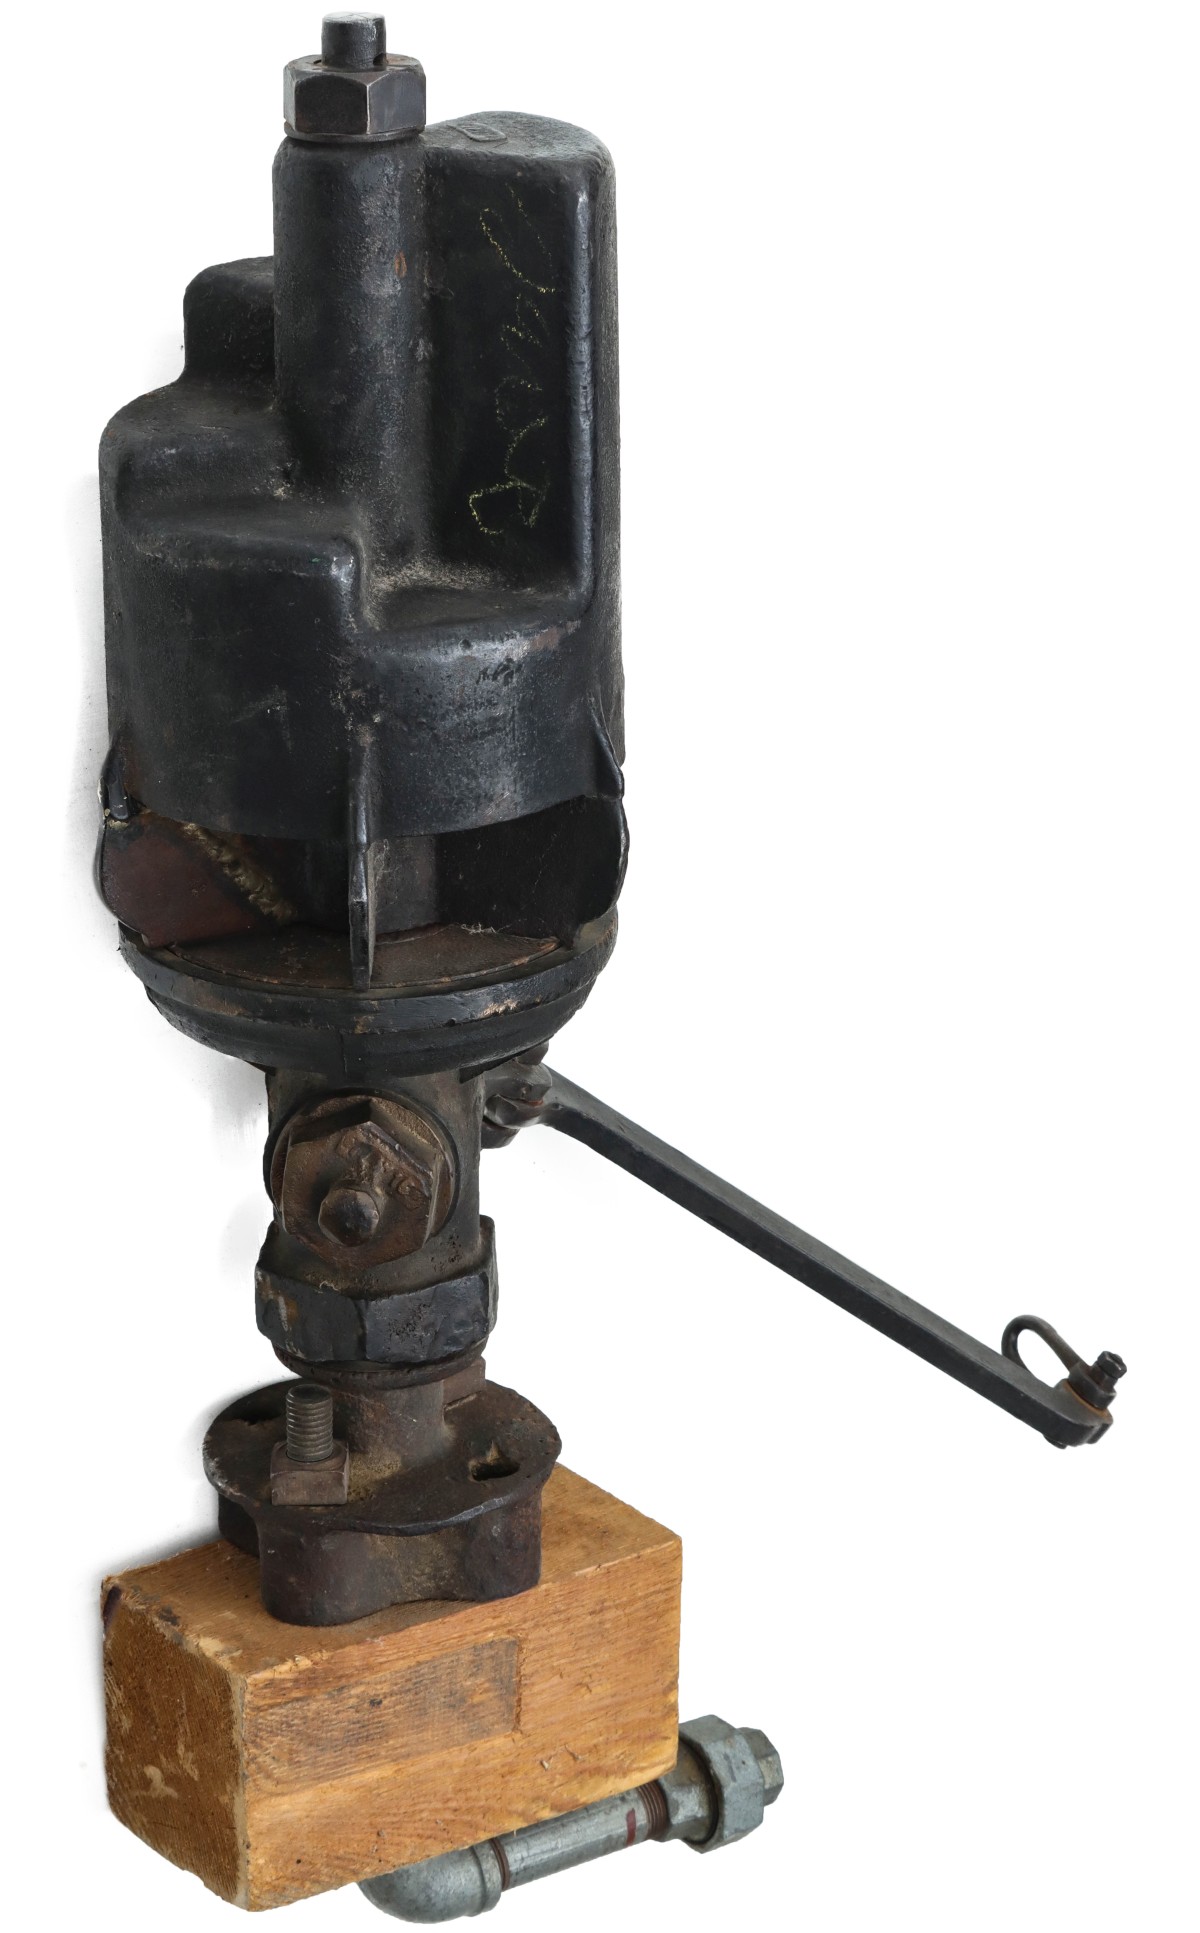 AN UNMARKED FIVE CHIME STEP TOP LOCOMOTIVE WHISTLE